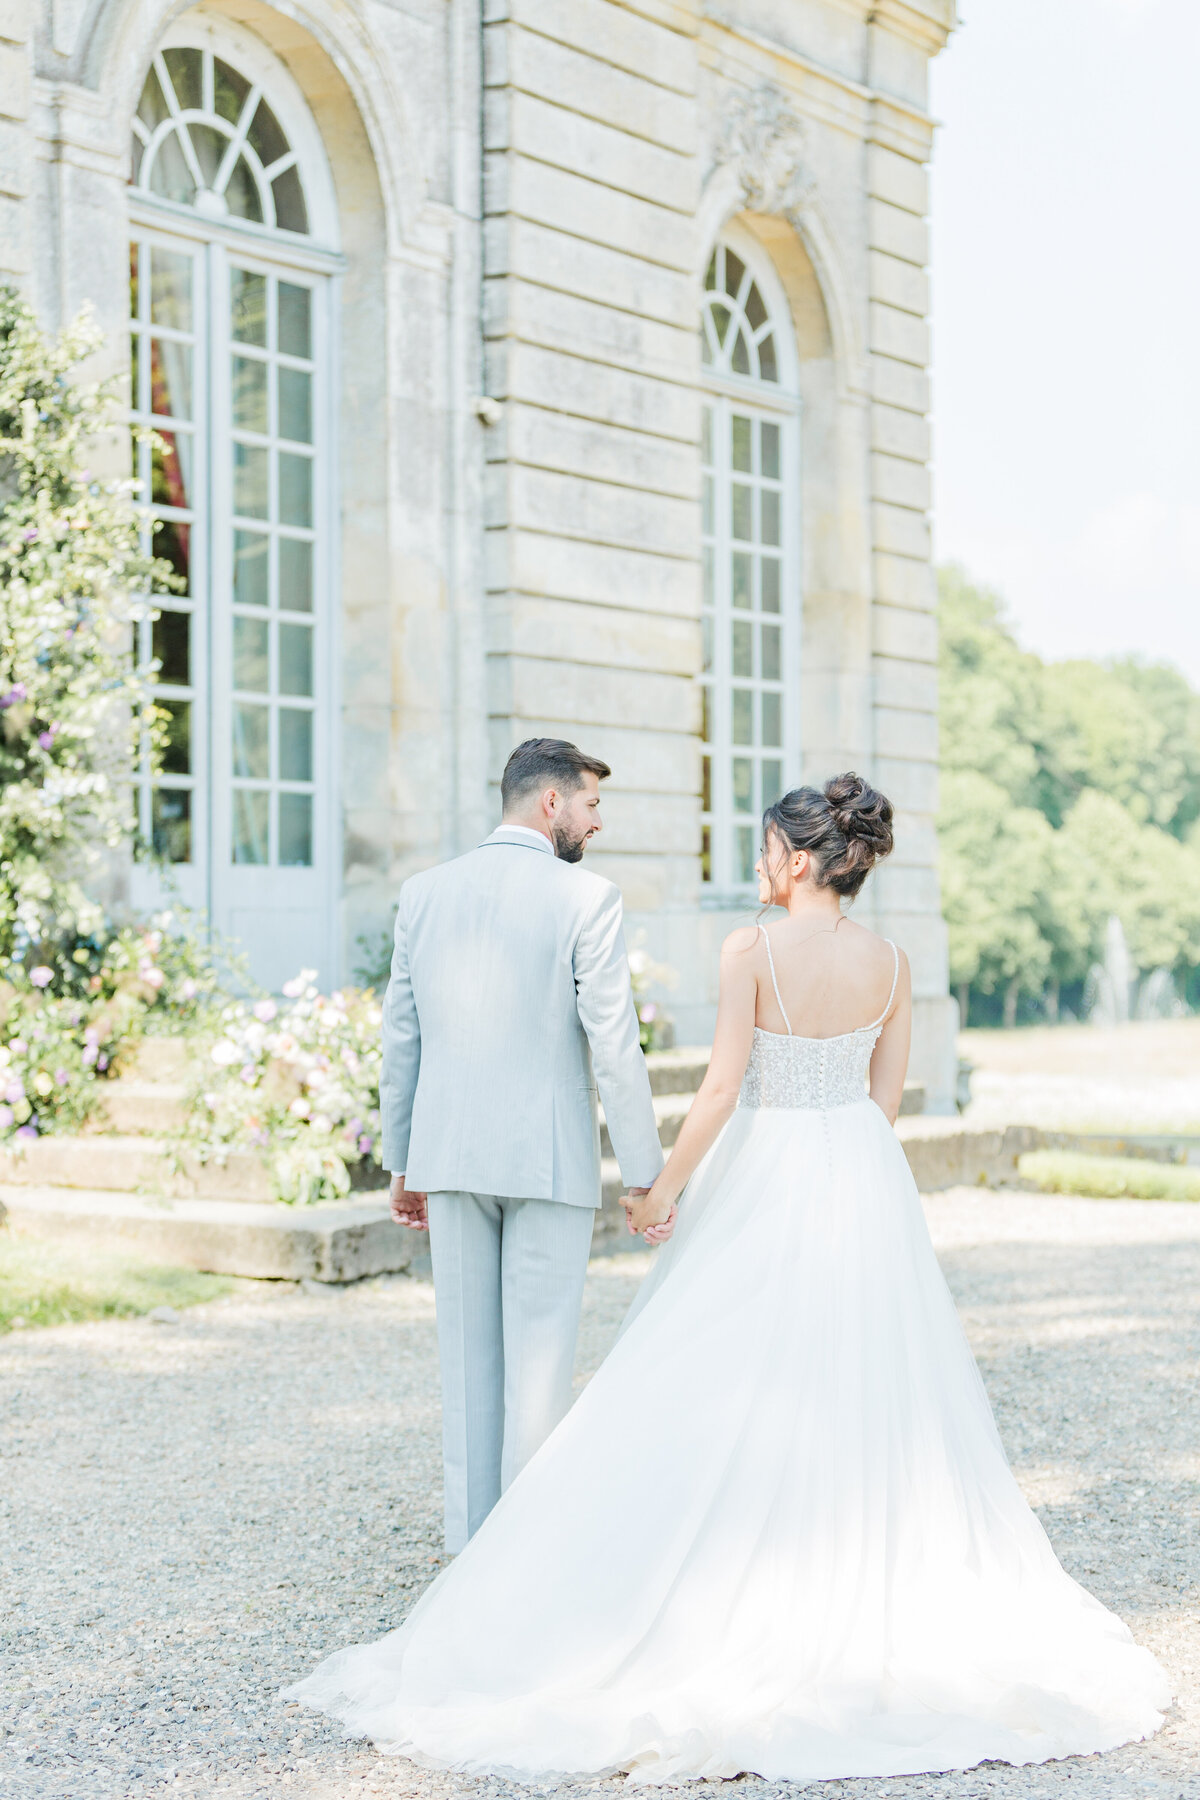 Lia Rose Weddings, based in Rhode Island captures an intimate moment between a bride and groom at their Paris, France destination wedding. The image is of the bride and groom's back. They are holding hands and looking at each other. Captured by destination wedding photographer Lia Rose Weddings